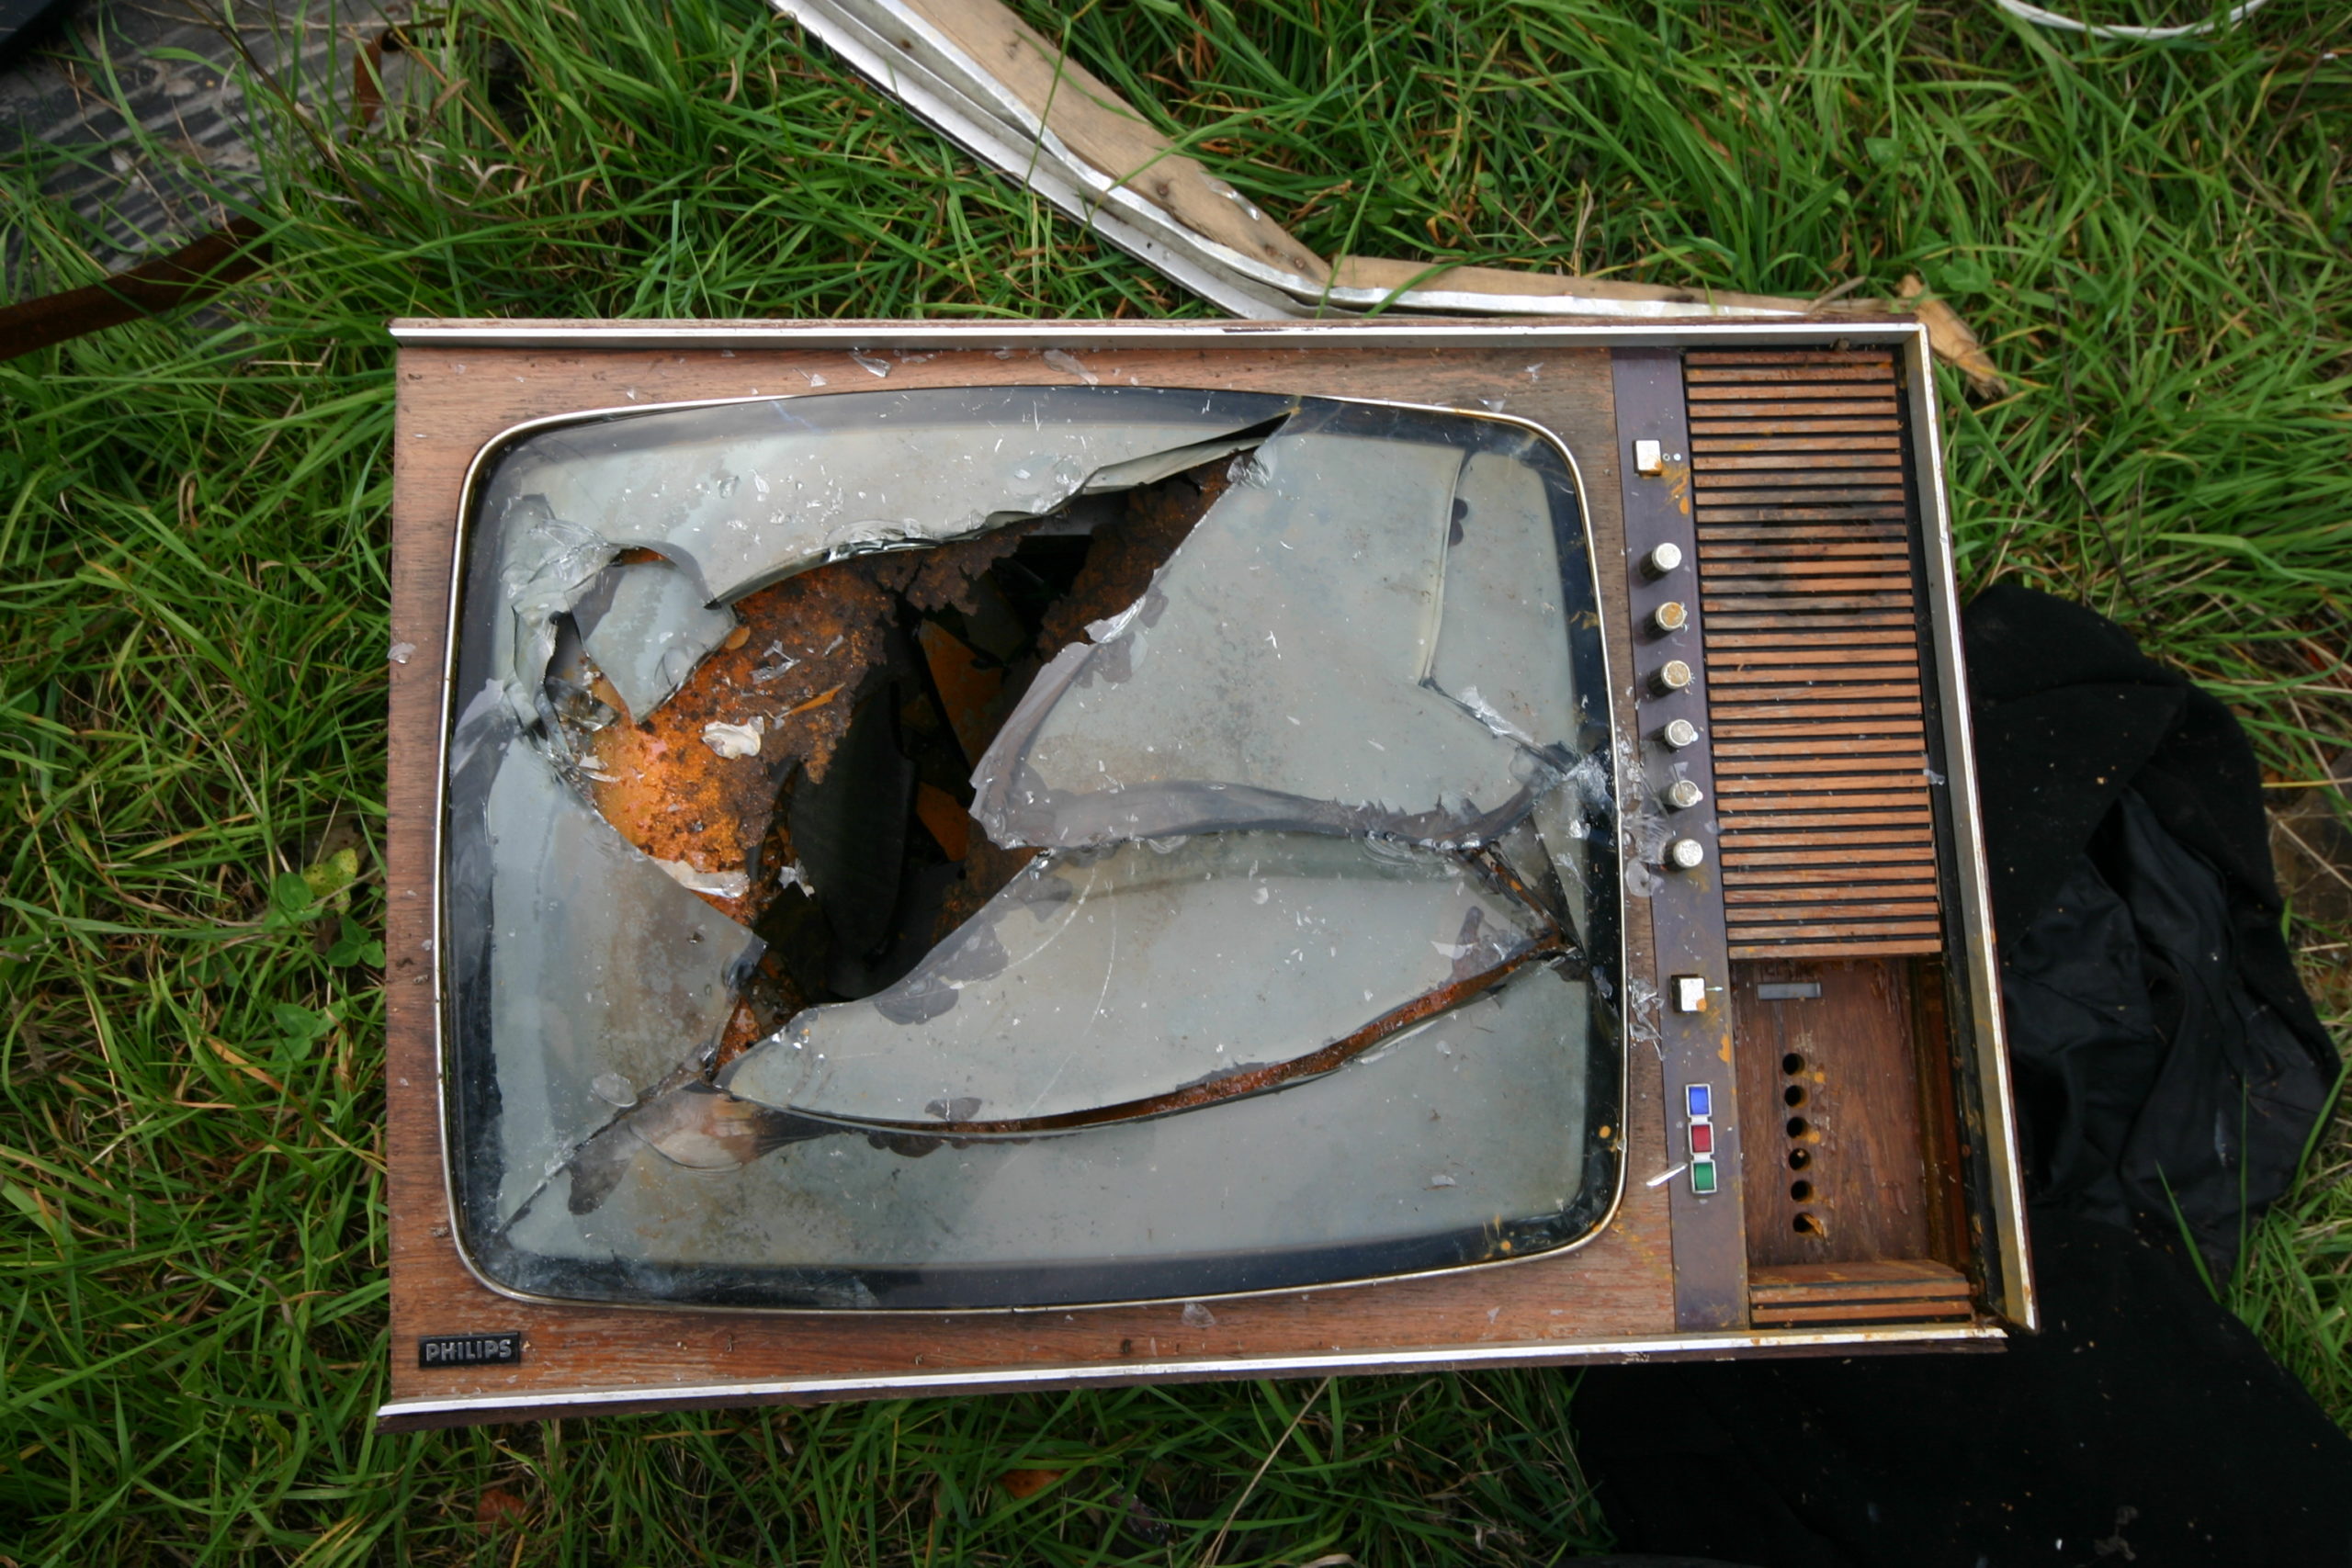 LXP - Lifexpe - Is Online TV Killing Traditional TV? (Infographic)